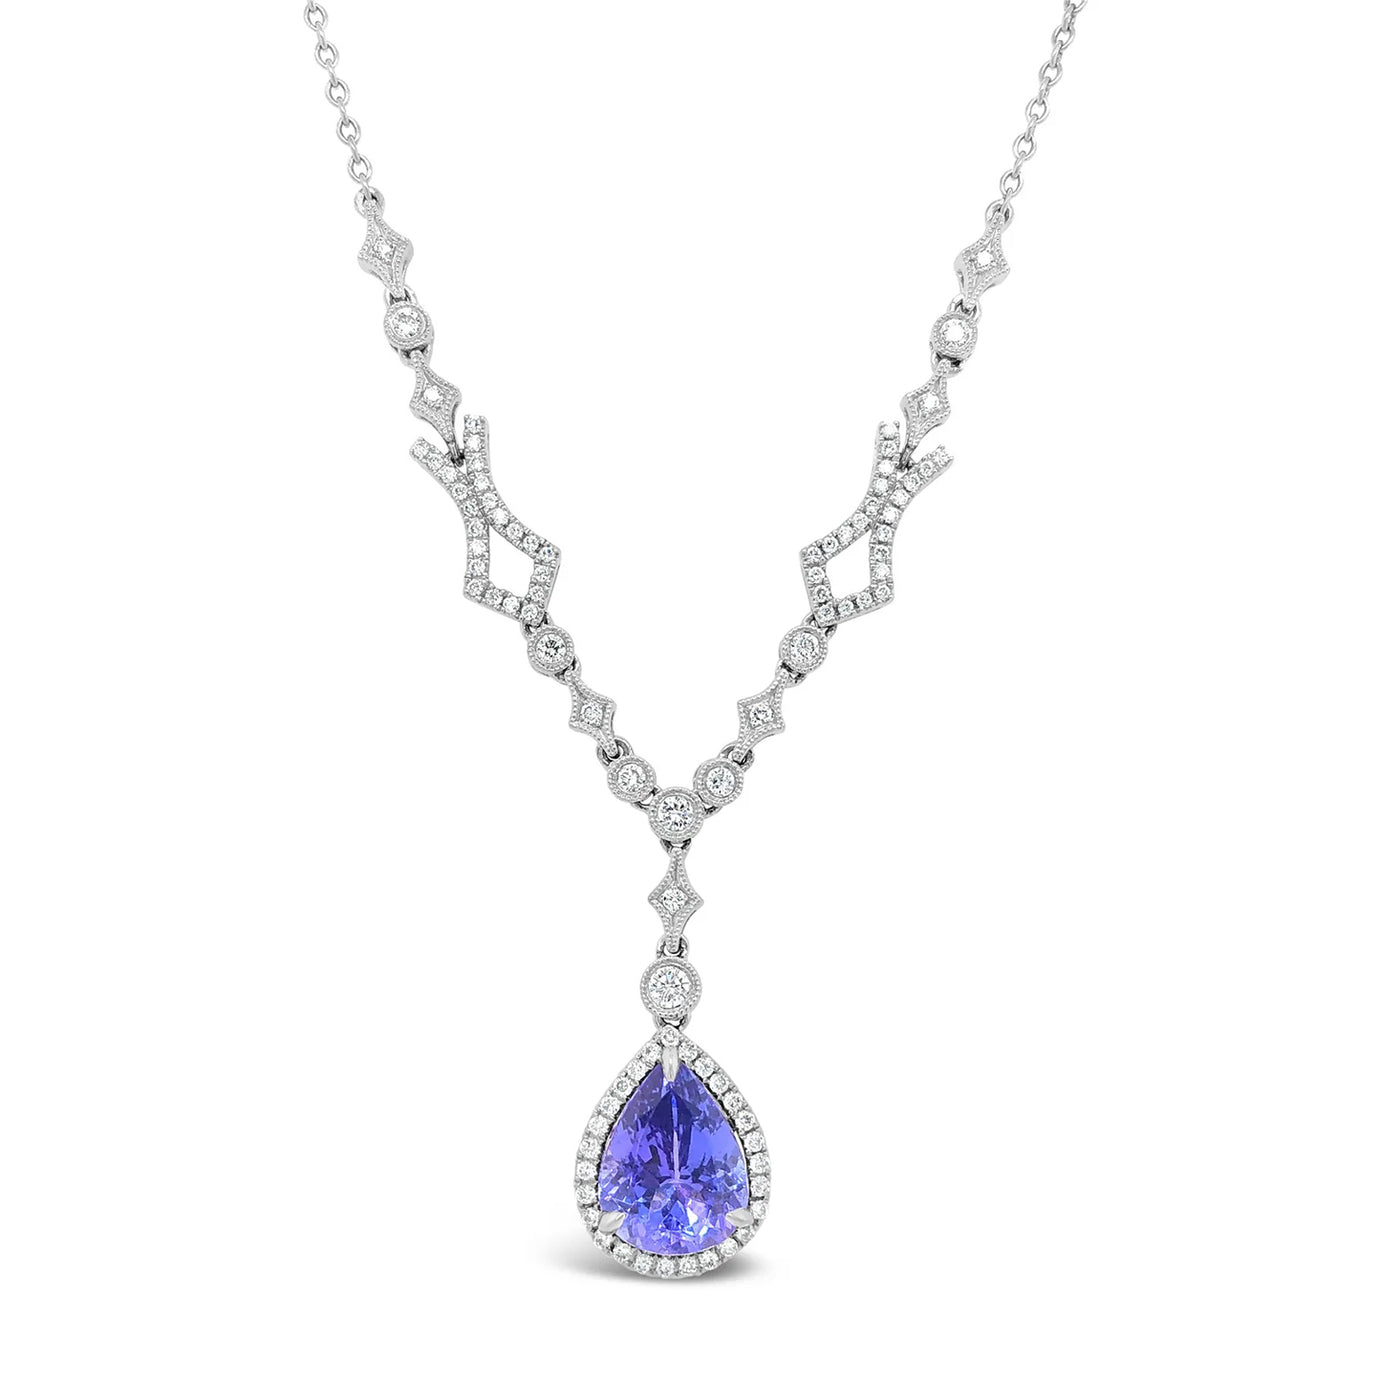 Pear shaped tanzanite Necklace with Diamond accents